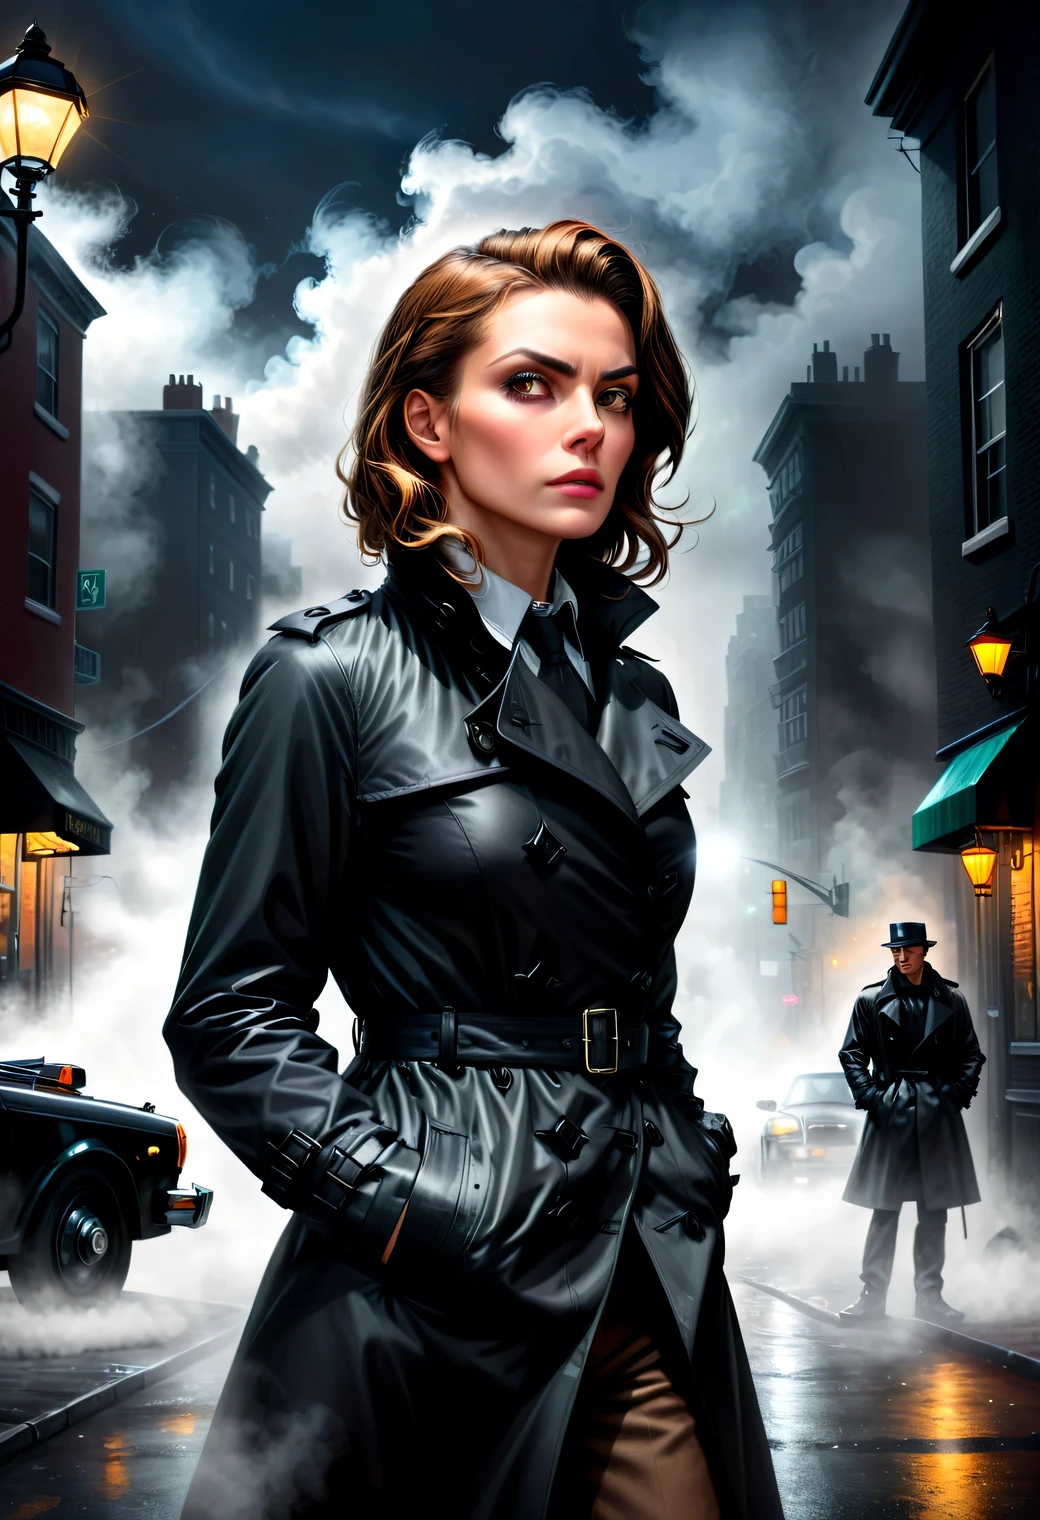 Illustration of a detective, Wearing a fashionable black trench coat, Confident Tension and thrill show in facial expressions BREAK Crime-solving, City streets, Street lights, parked cars thin mist, Tyndall effect　BREAK Mysterious,  Low angle, dramatic lighting, dark fantasy, oil painting, bold stroke of the brush, intricate detail rendering, digital art, 3D rendering, Octane render, breathtakingly beautiful CG